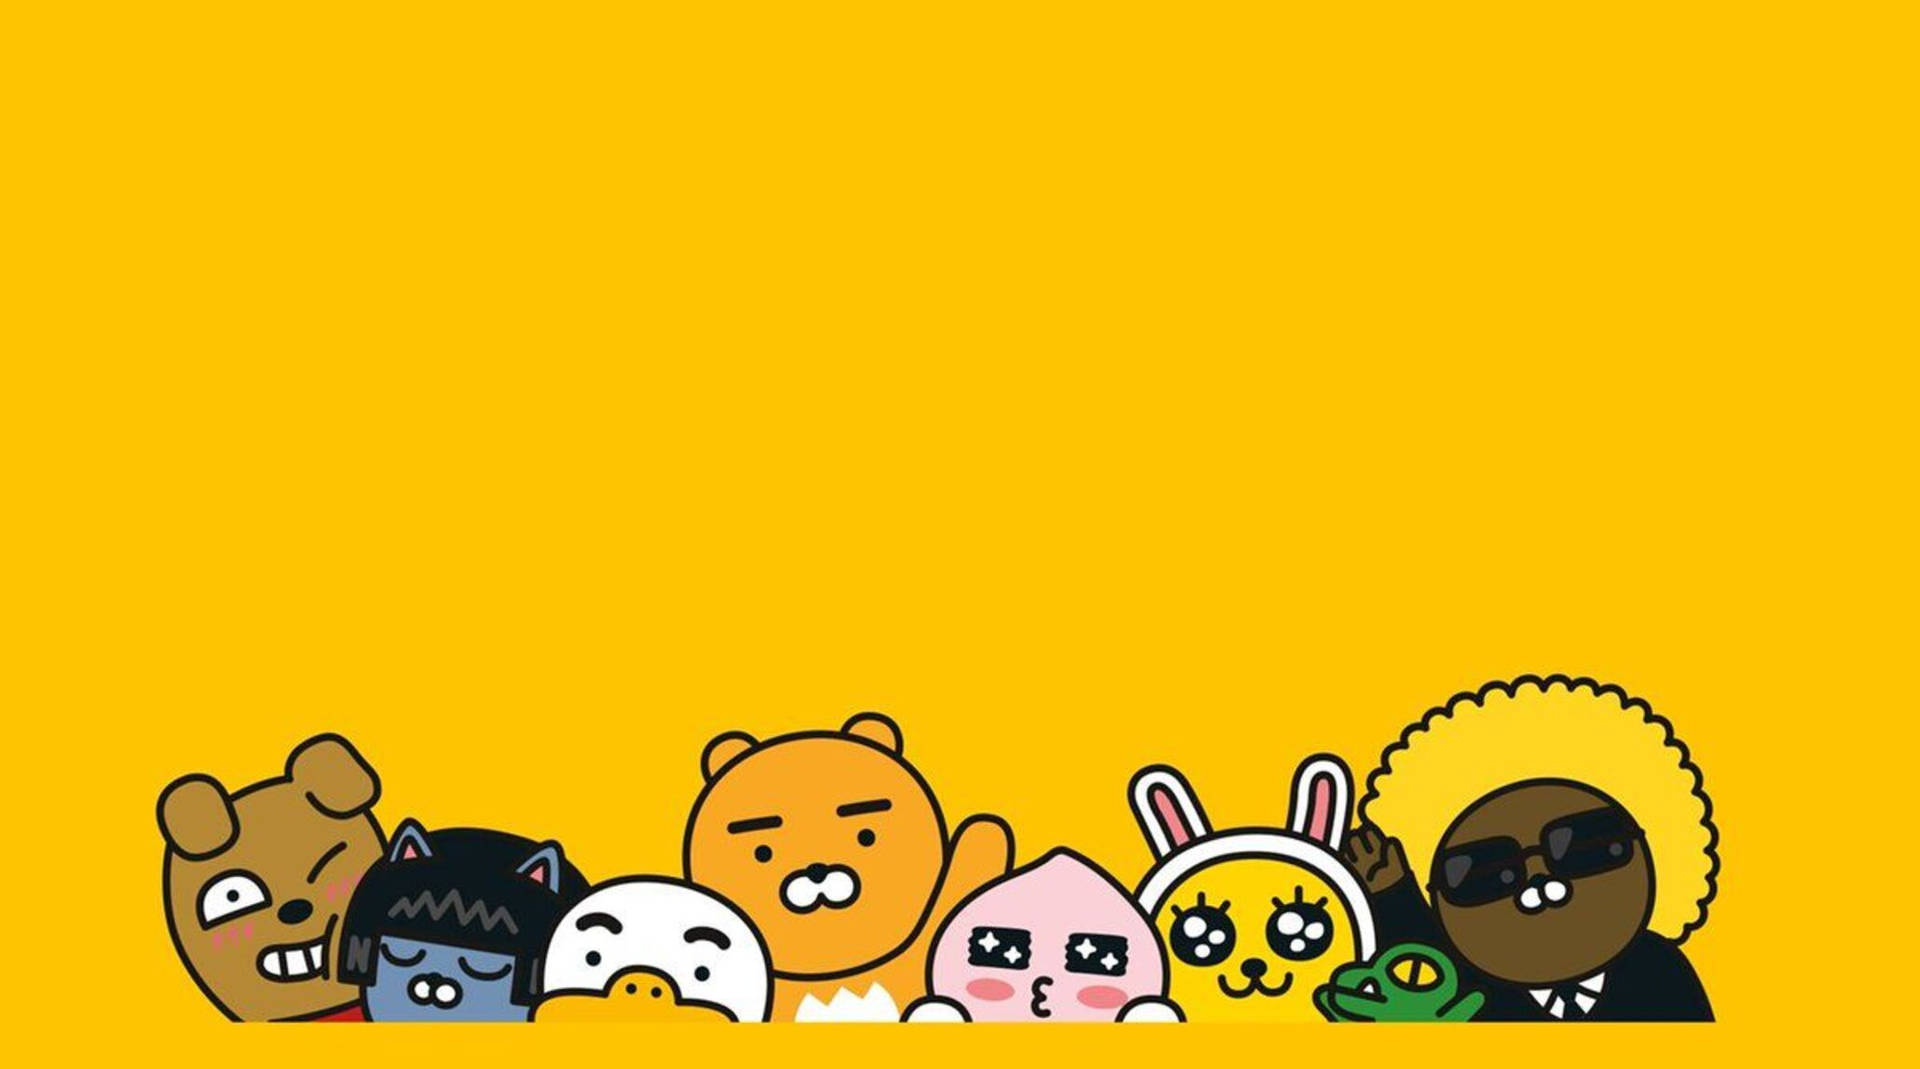 A Happy Hello From Kakao Friends